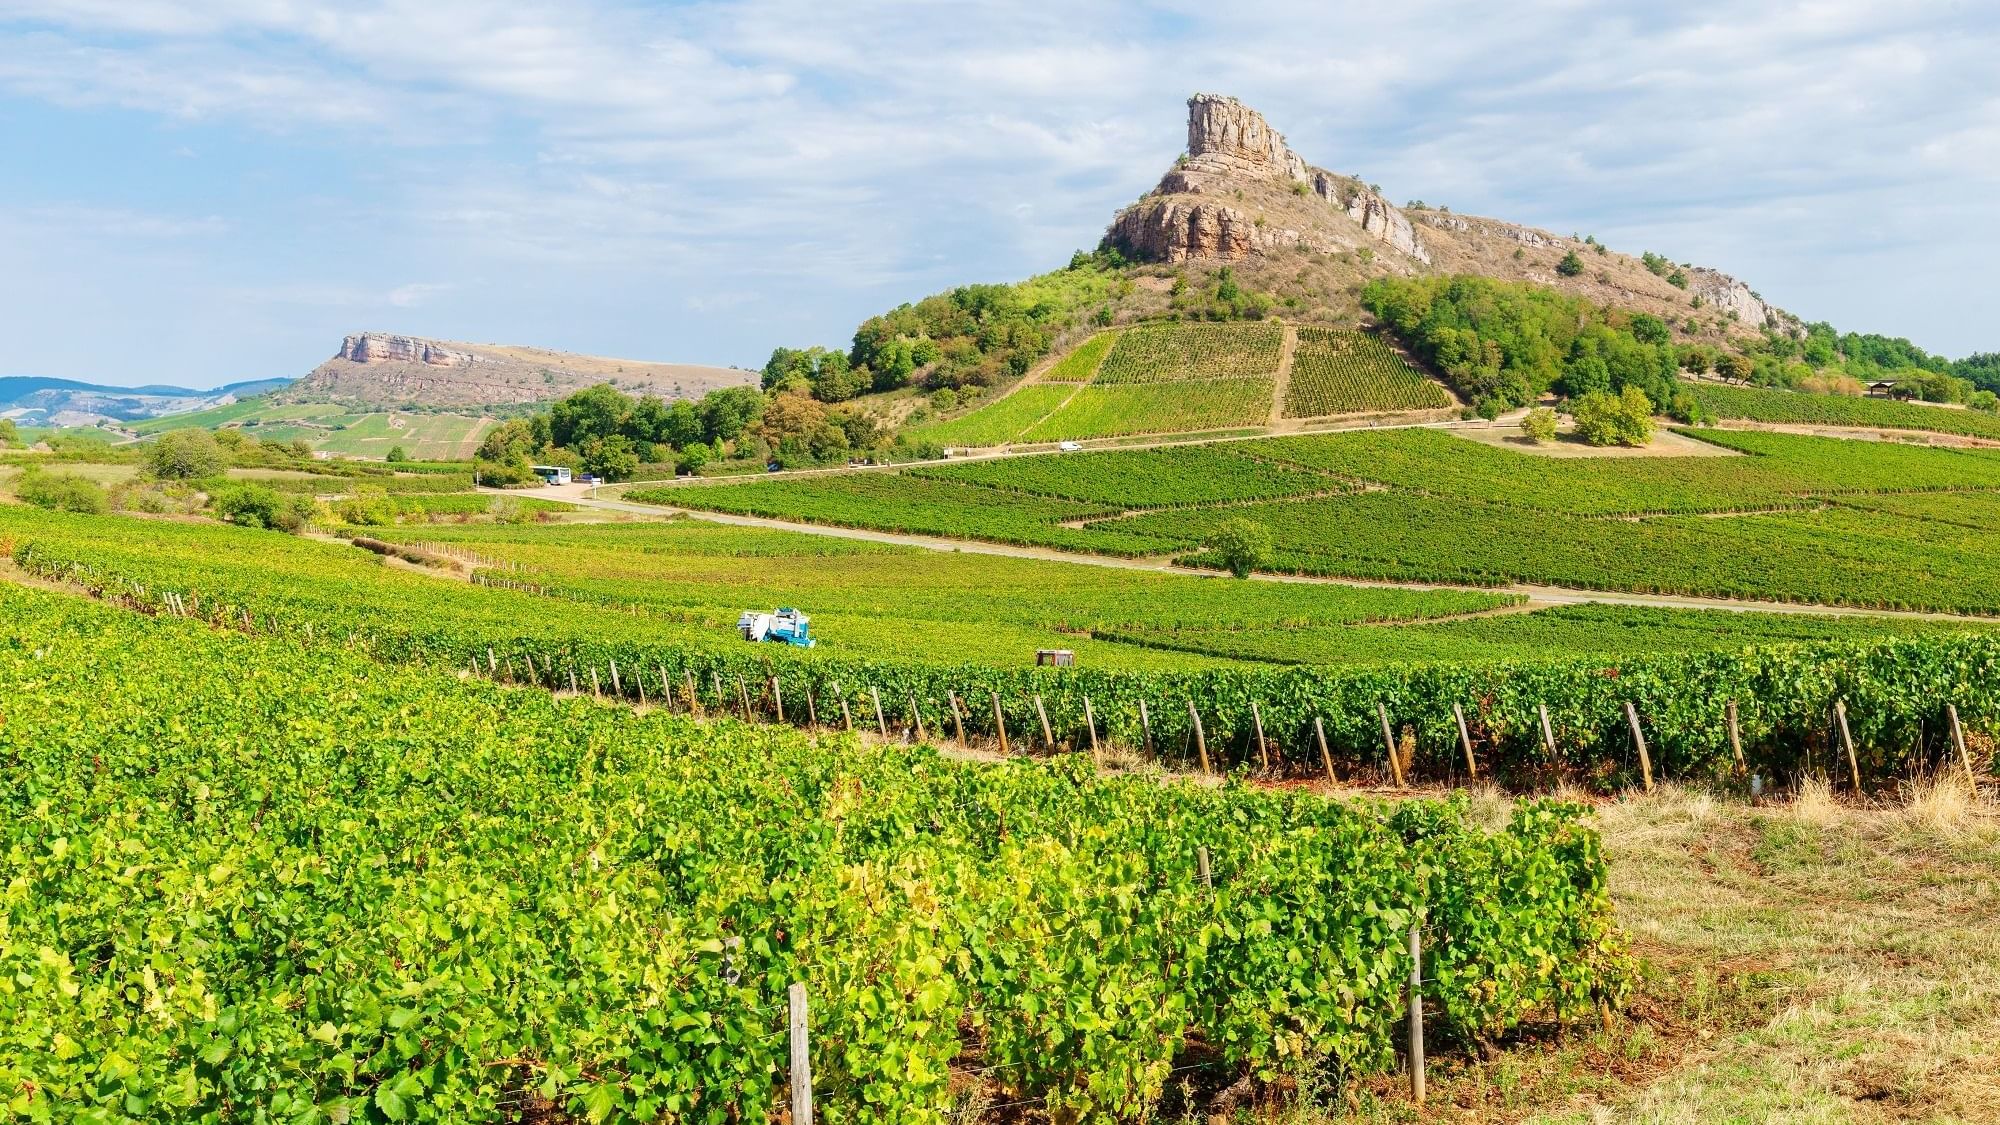 View of Rock of Solutré from a vineyard near Originals Hotels